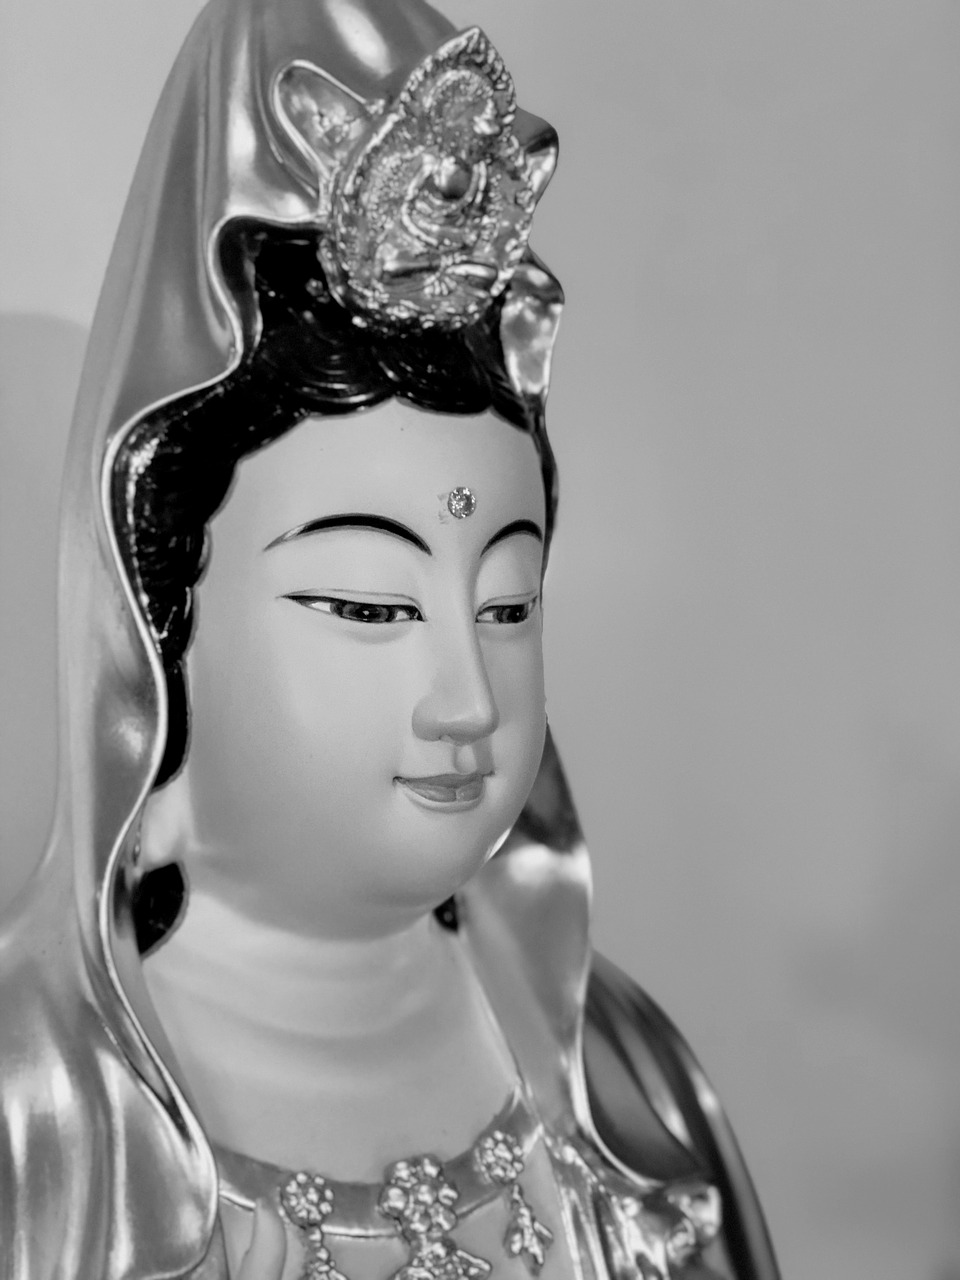 guanyin  a kindly face  serenity free photo